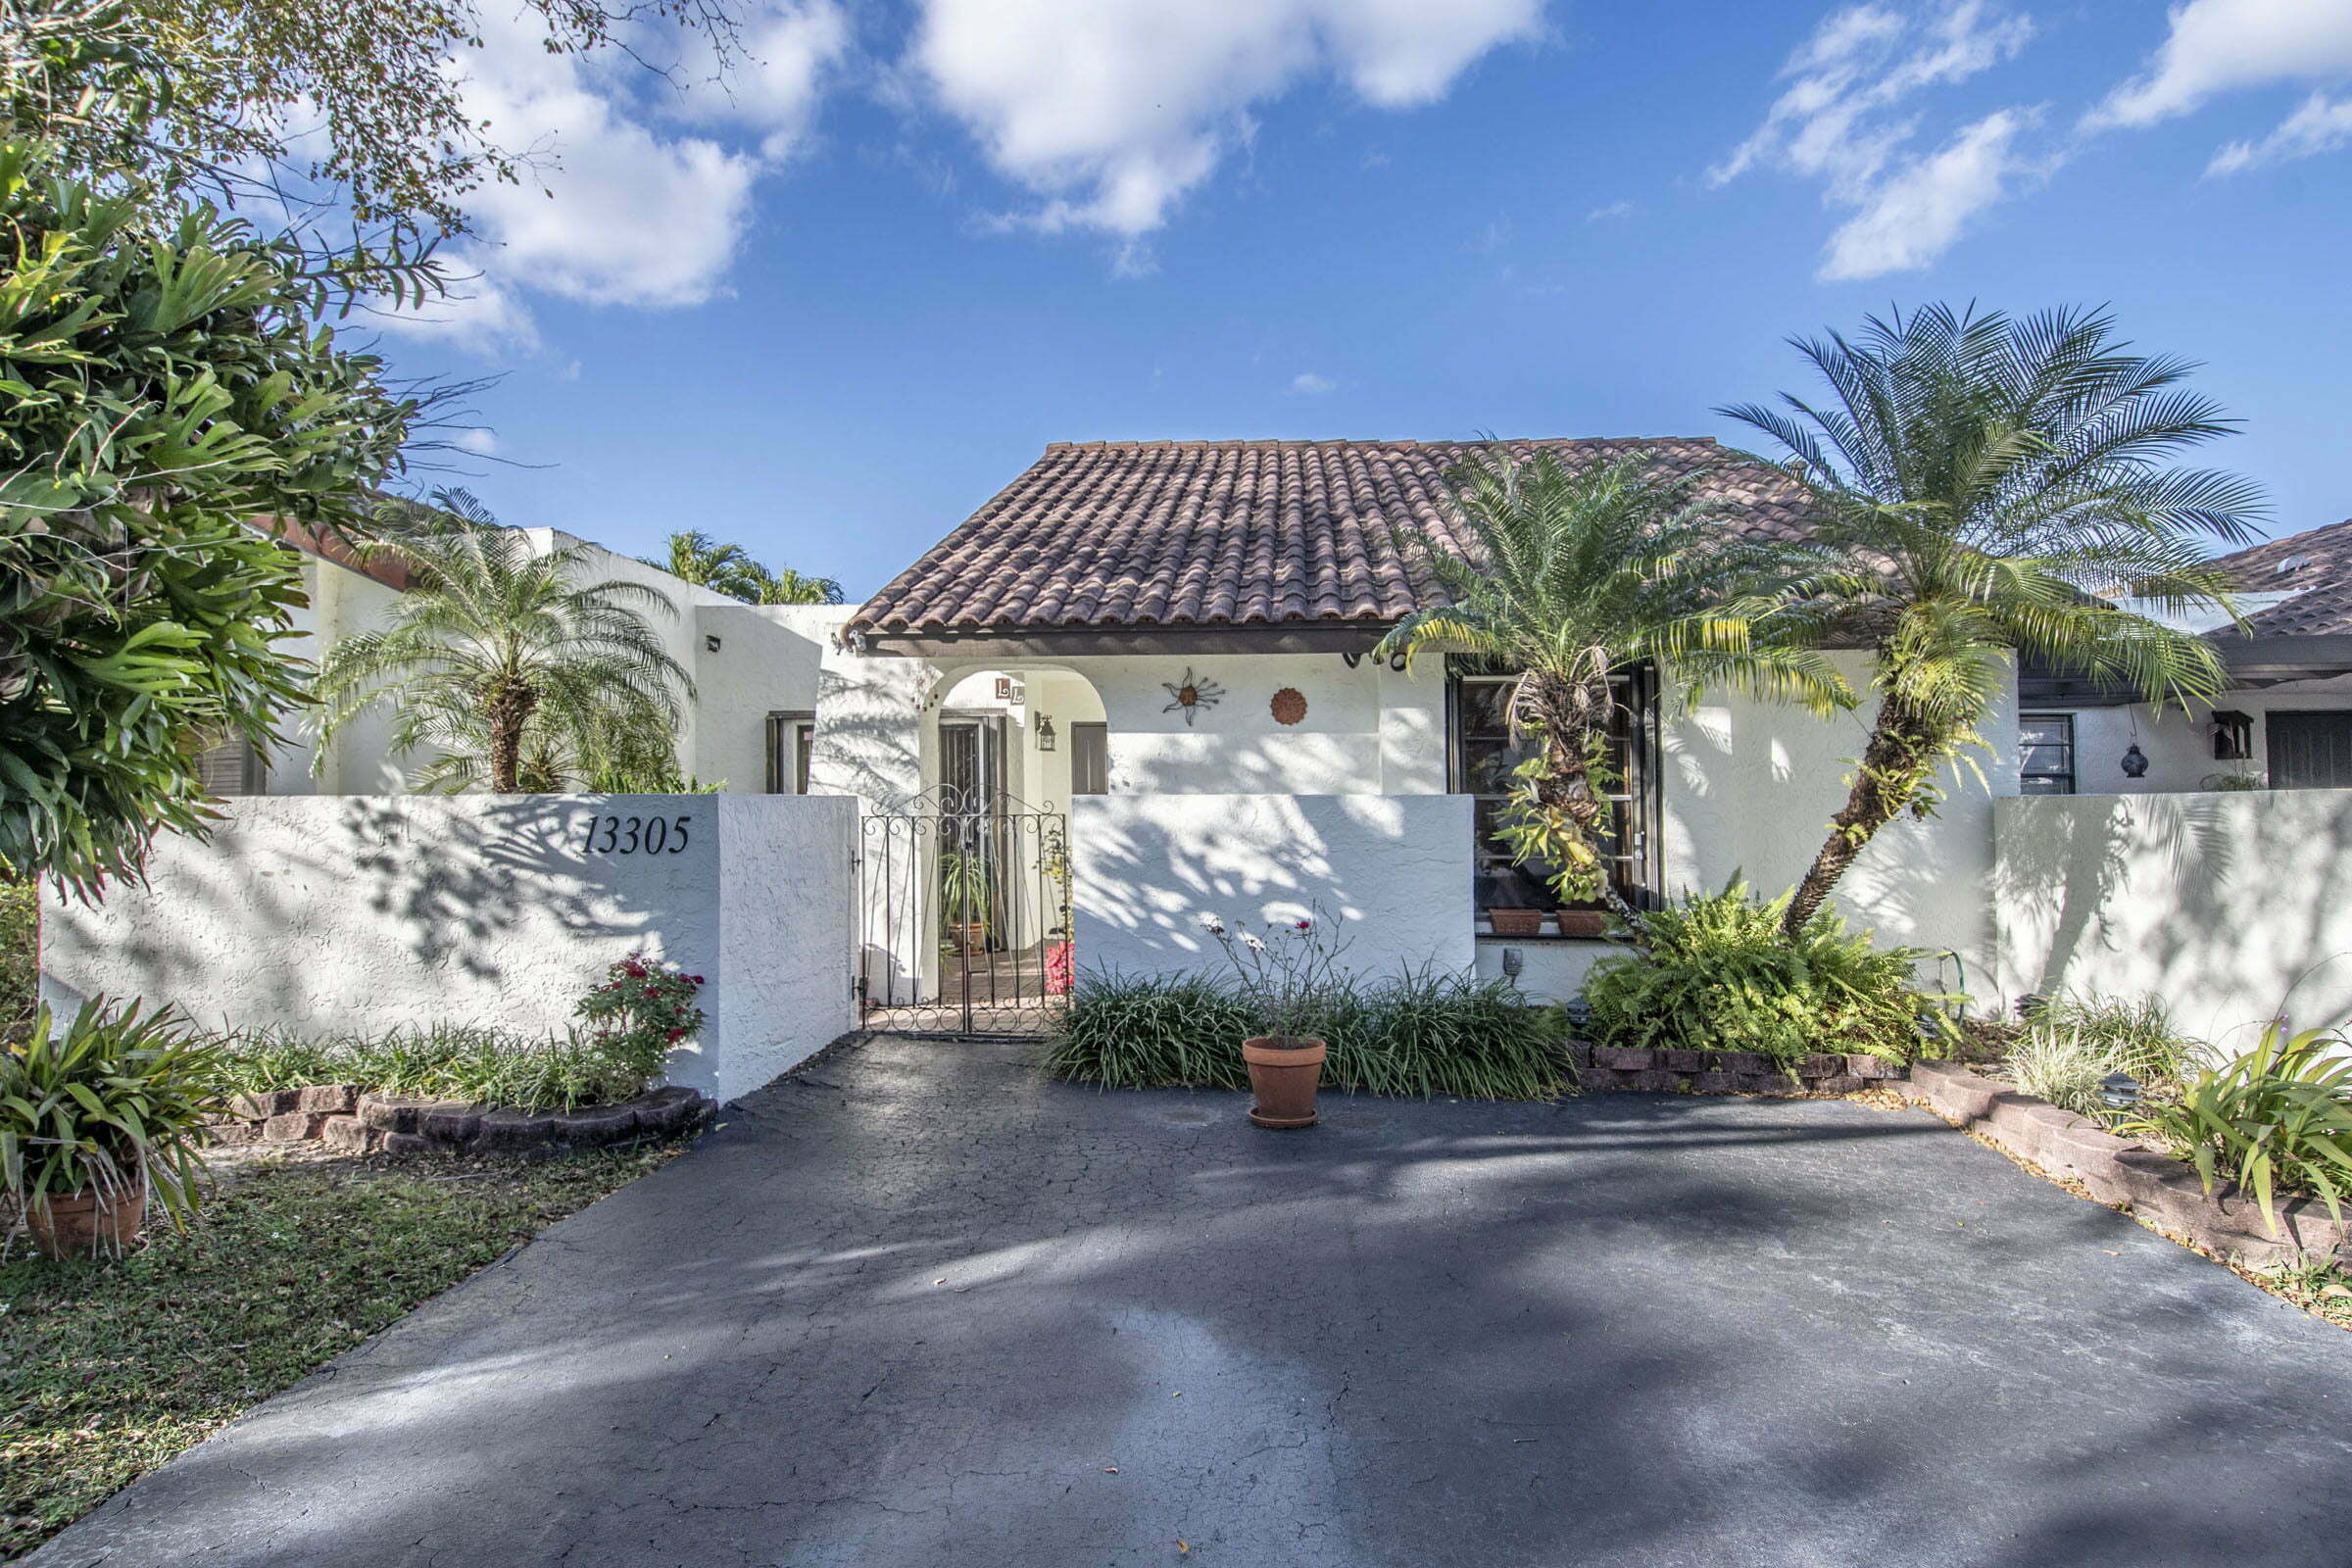 House Front - 13305 SW 110 Terrace, Miami, FL 33186 - © Flat Fee Florida Realty